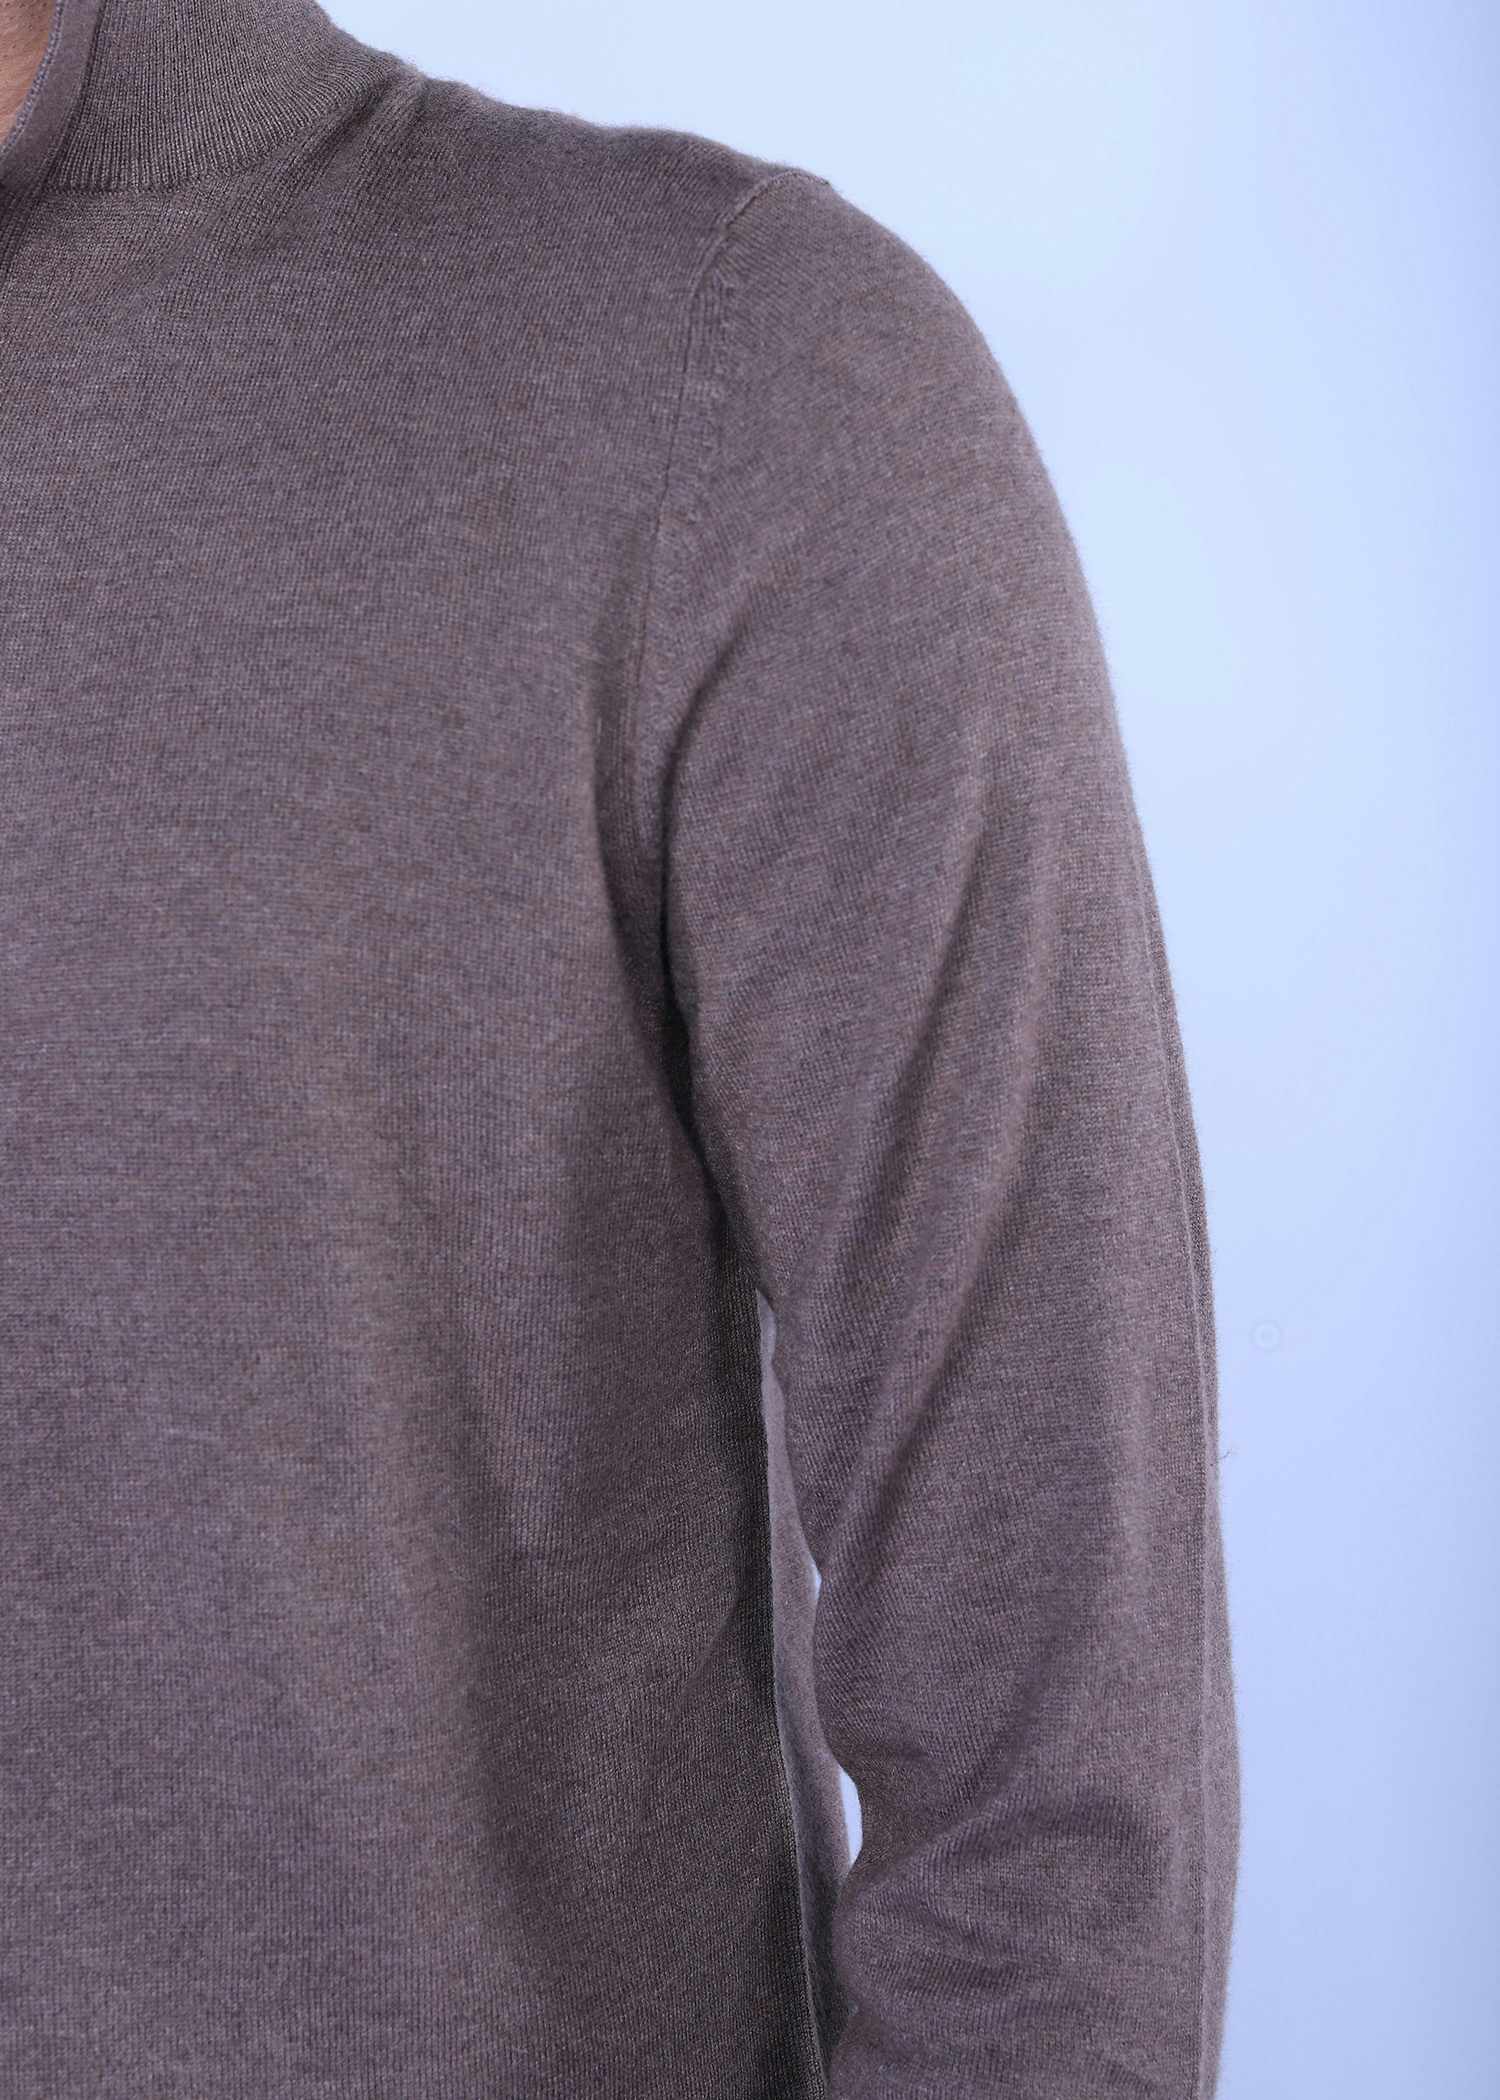 hornero i sweater brown color close front view